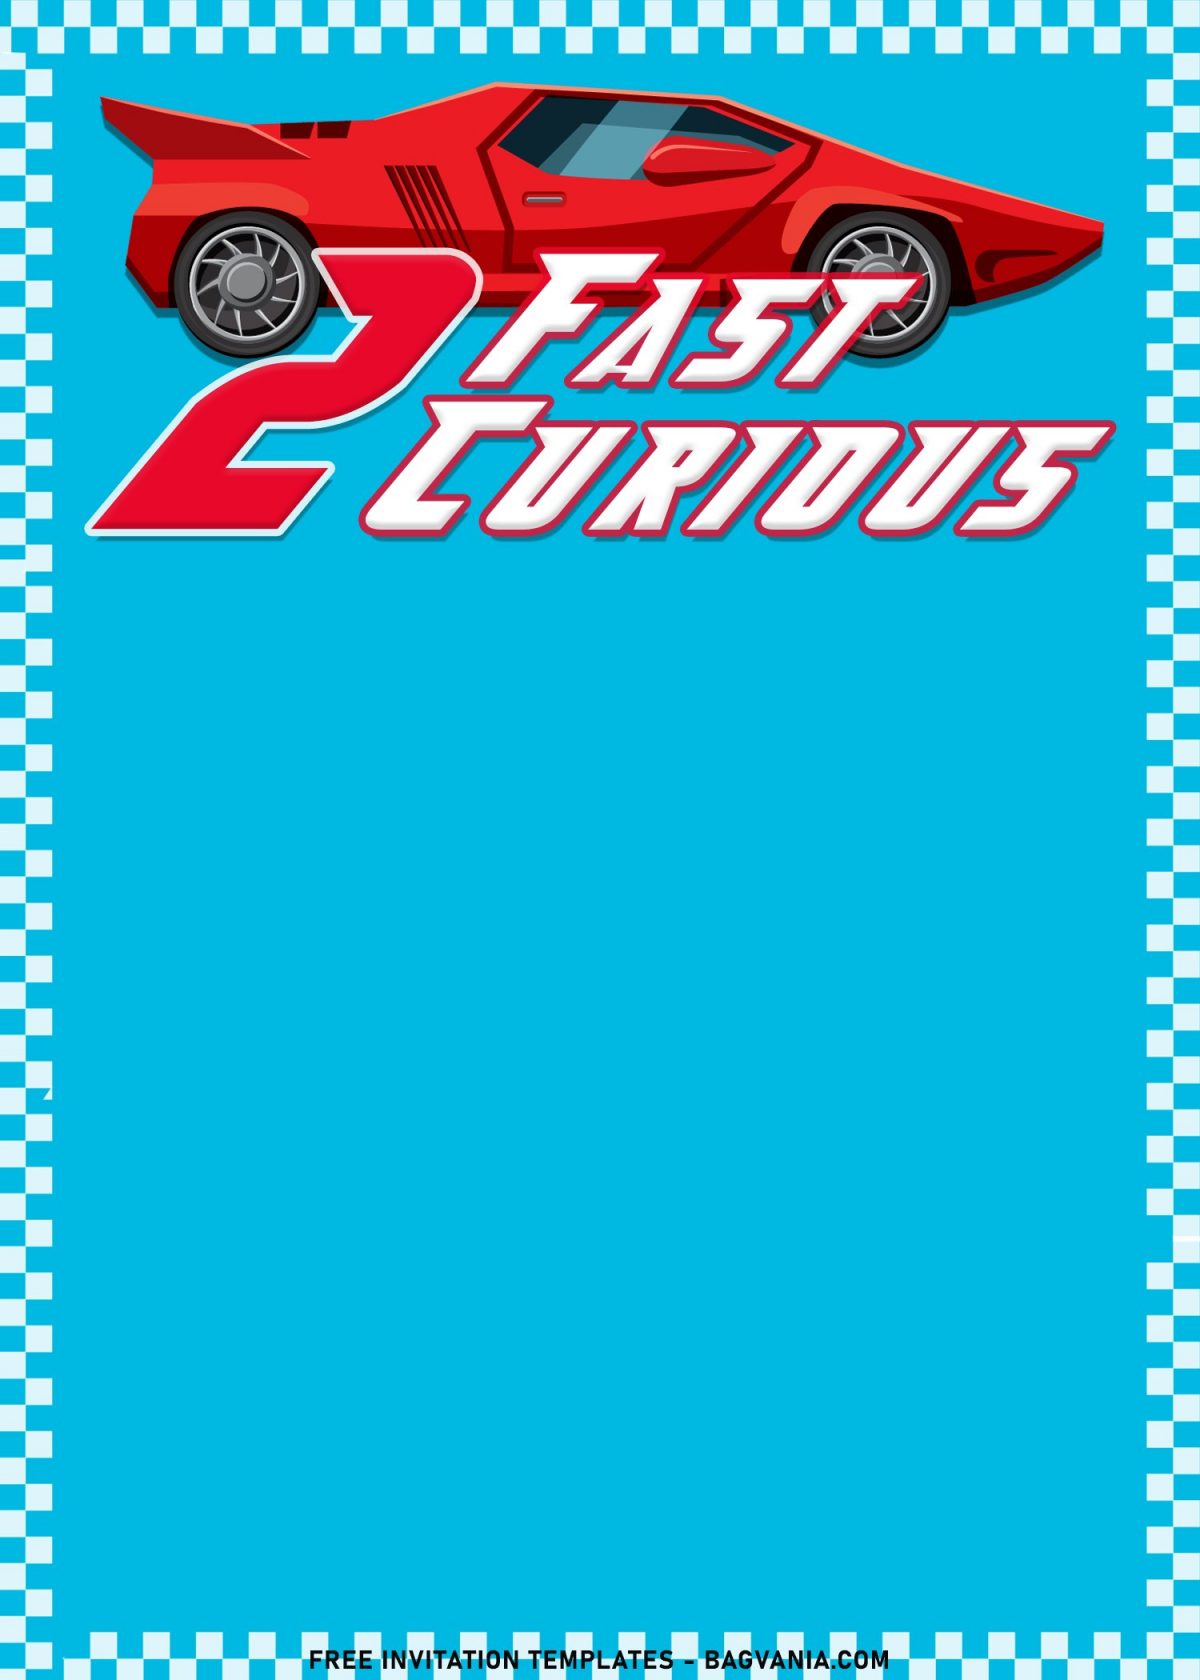 8+ Boys' Favorite 2 Fast 2 Curious Birthday Invitation Templates with Awesome Sport car